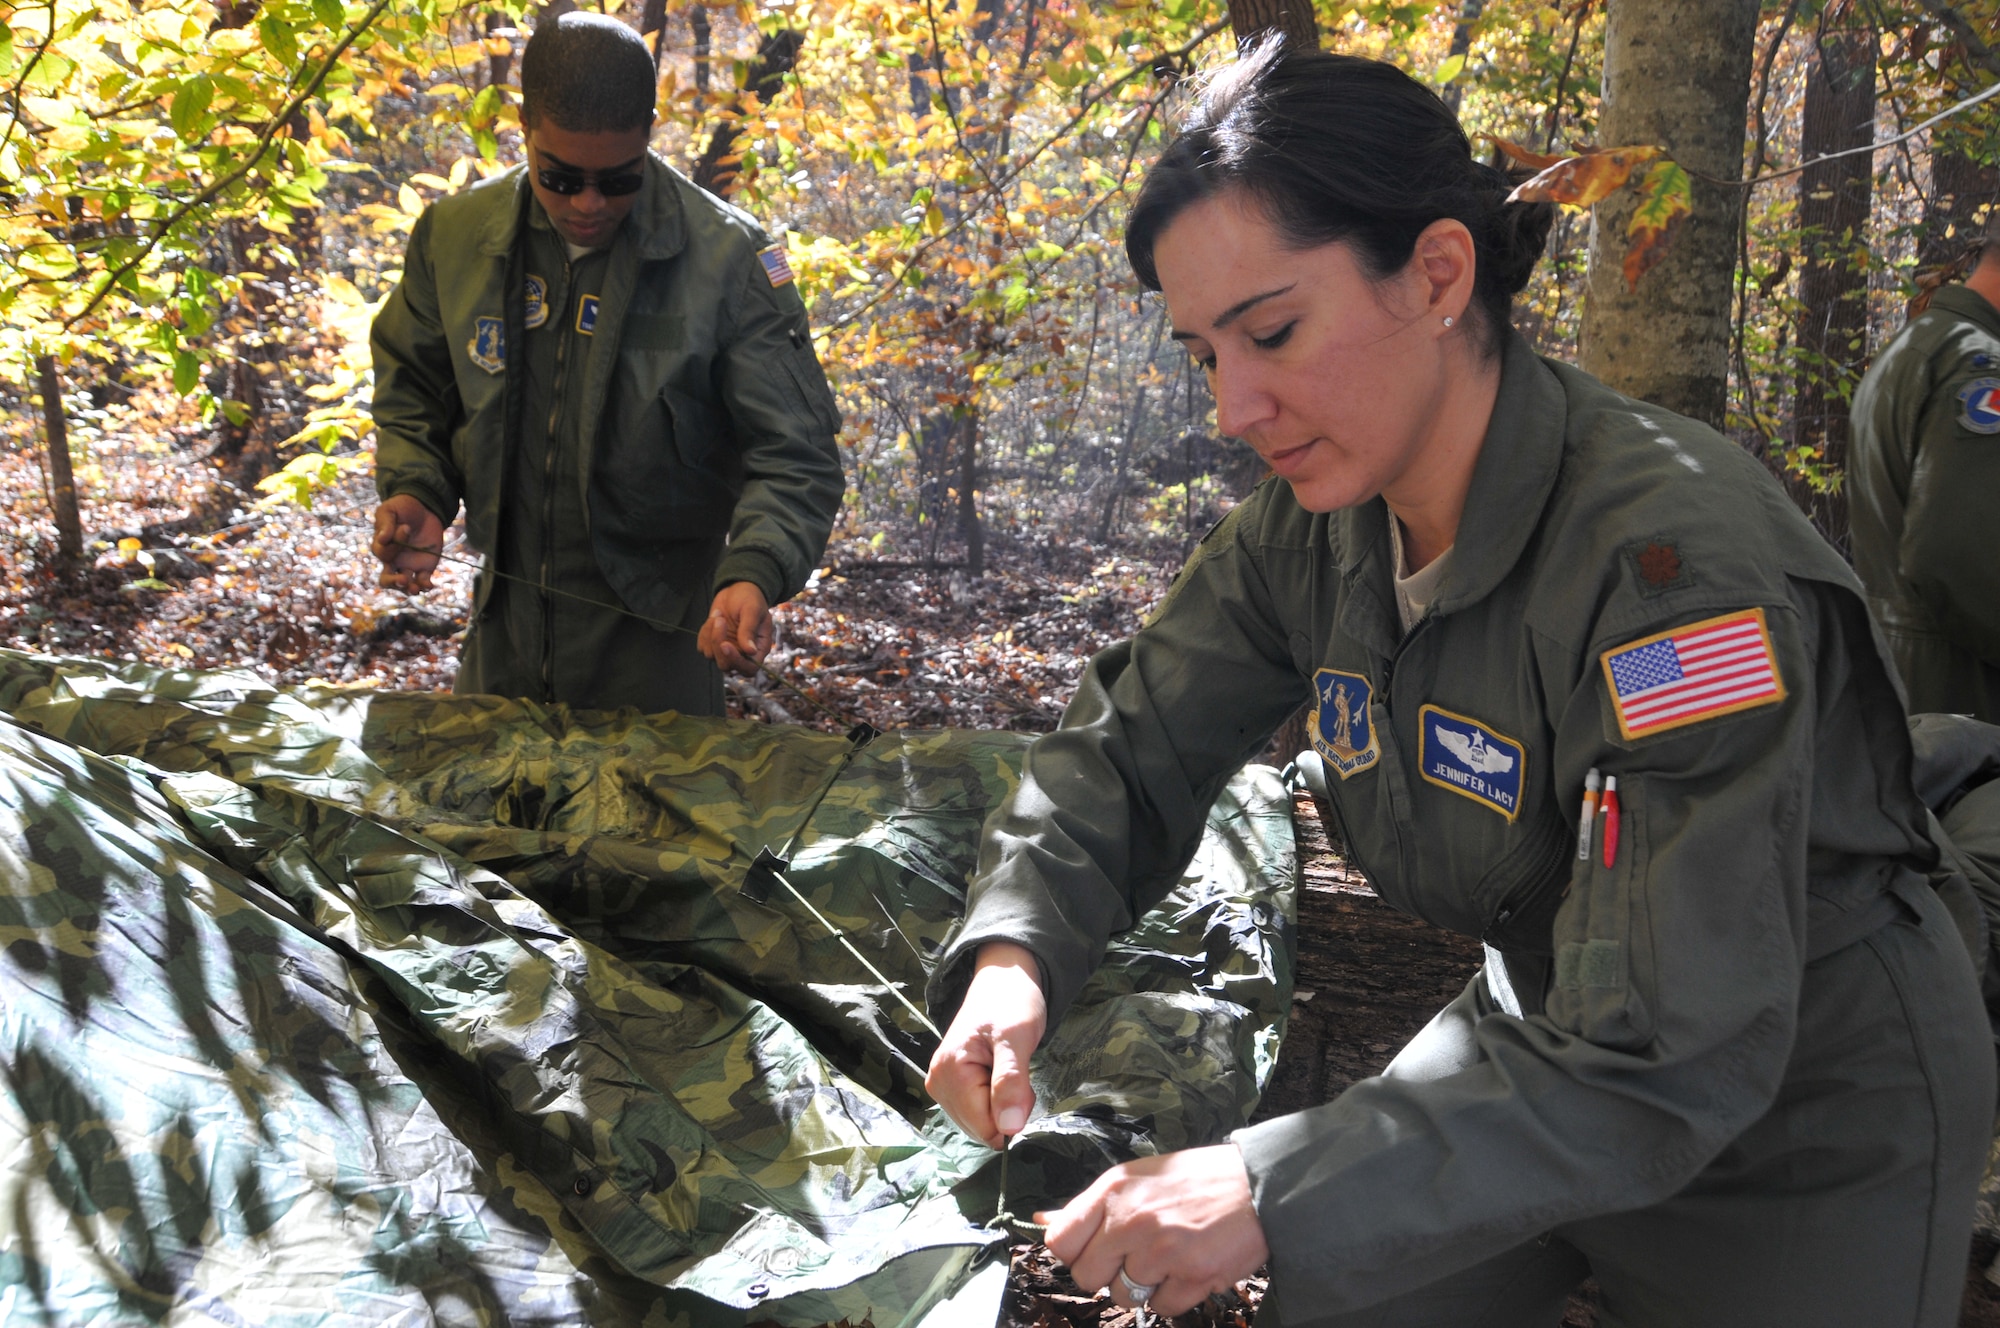 U.S. Air Force Maj. Jennifer Lacy builds a shelter during Combat Survival Refresher training held Nov. 3, 2013. This training aims to enhance the survivability and combat readiness of aircrew. Lacy has since been promoted to the rank of lieutenant colonel and currently serves as commander of the 145th Force Support Squadron. (U.S. Air National Guard photo by Master Sgt. Richard Kerner/Released)